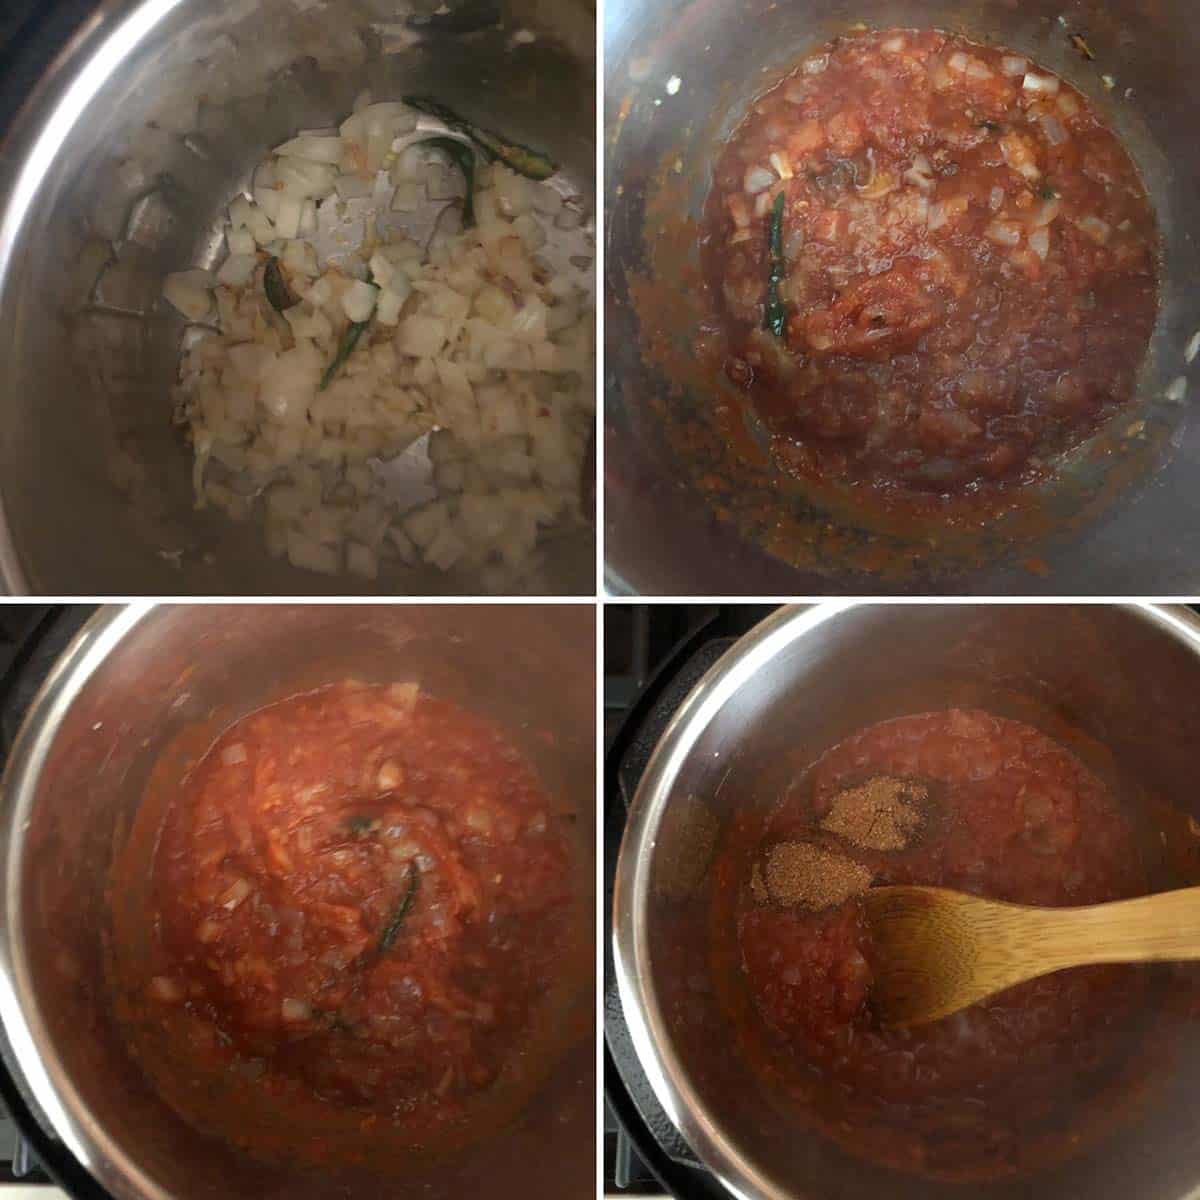 4 panel photo showing the addition of tomato puree and spices to Instant pot.